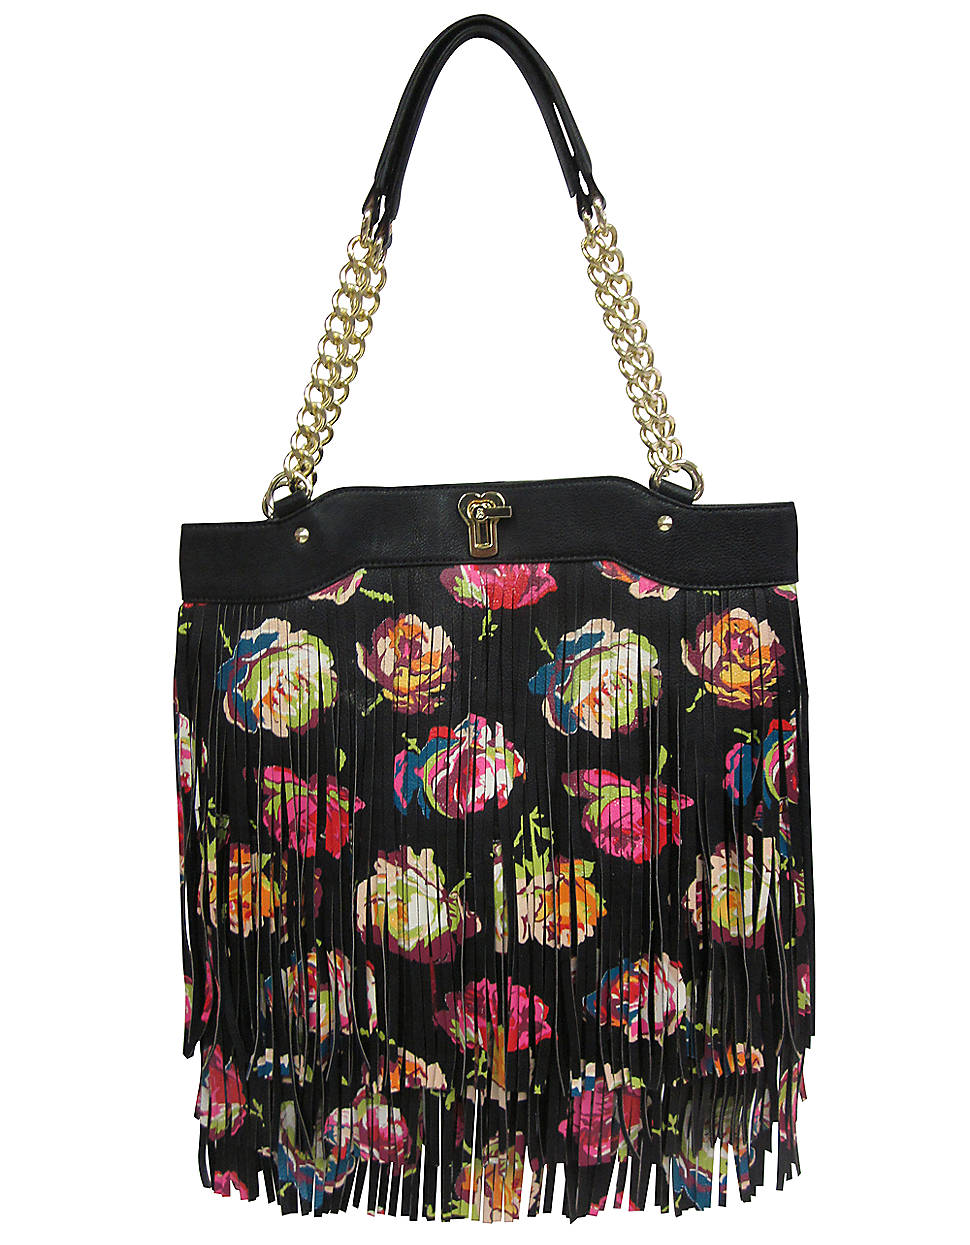 Betsey Johnson Fringy Floral Tote Bag in Black - Lyst